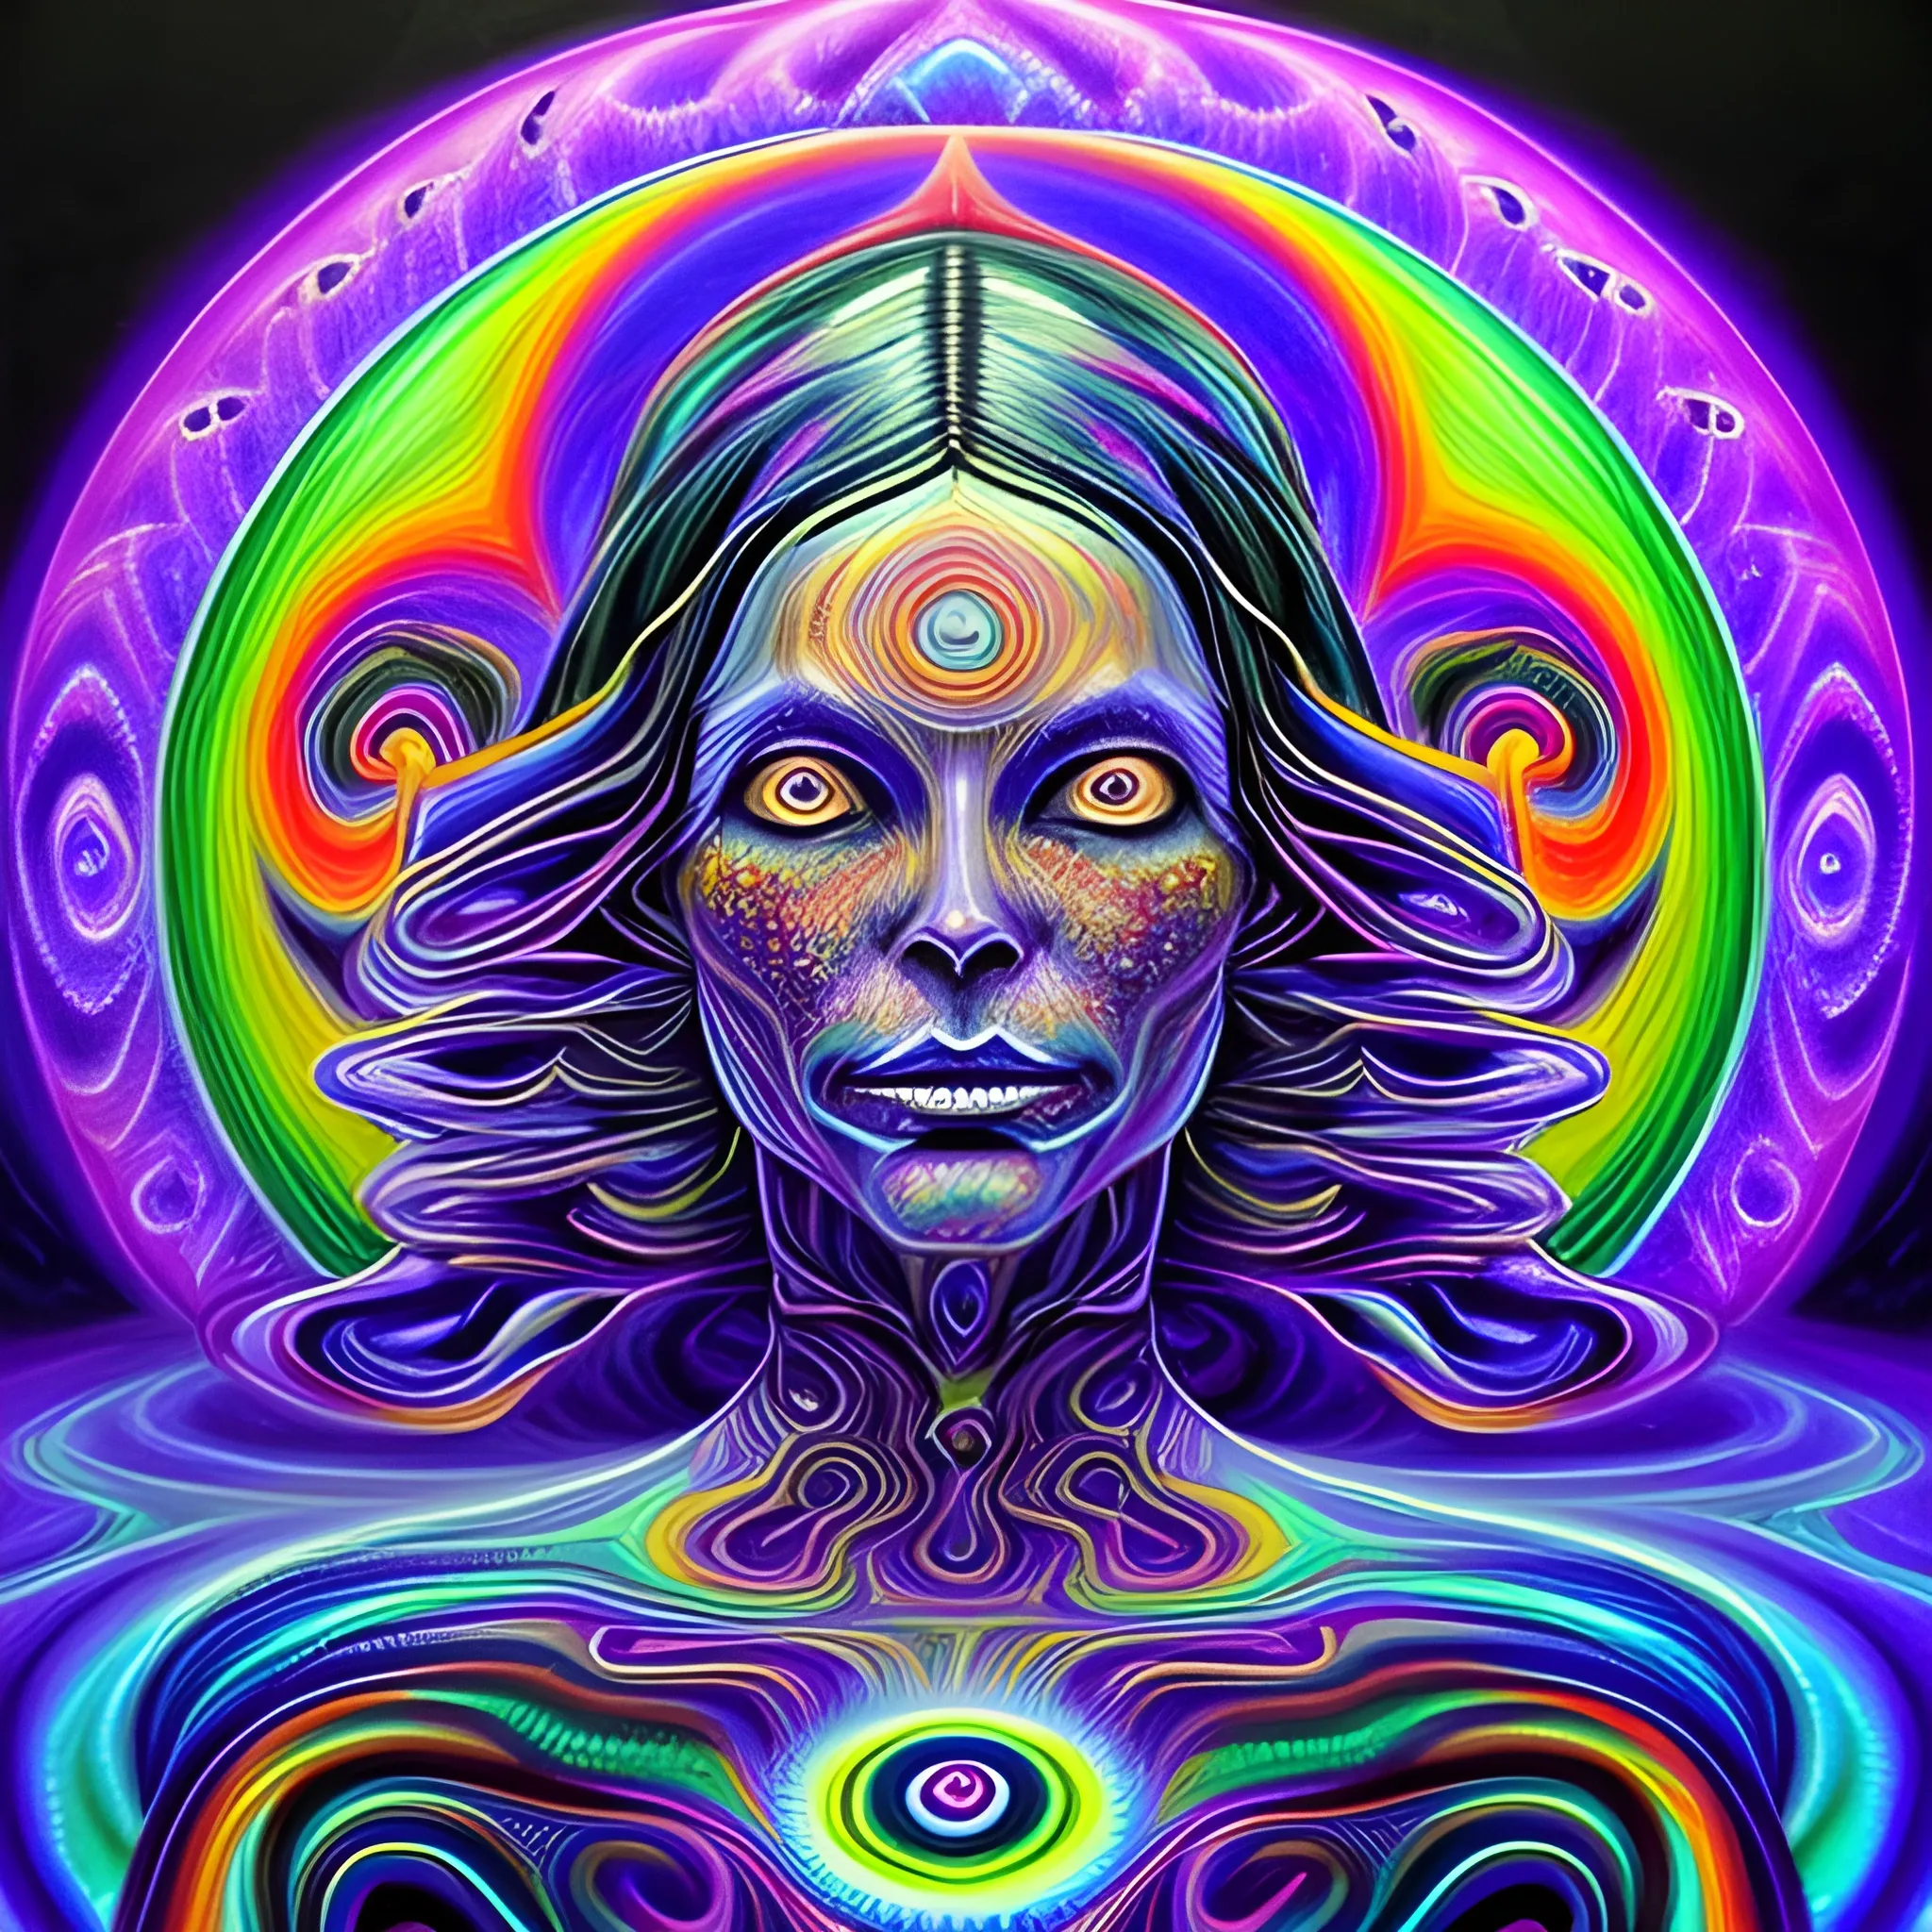 mysterious witch, incredible ultra dimensional psychedelic experience time, while tripping on dmt, energy waves, trippy melting eyes, overwhelming psychosis of self - realization and burning awakening, masterpiece composition, by barclay shaw, louis dyer, pablo amaringo , Pencil Sketch